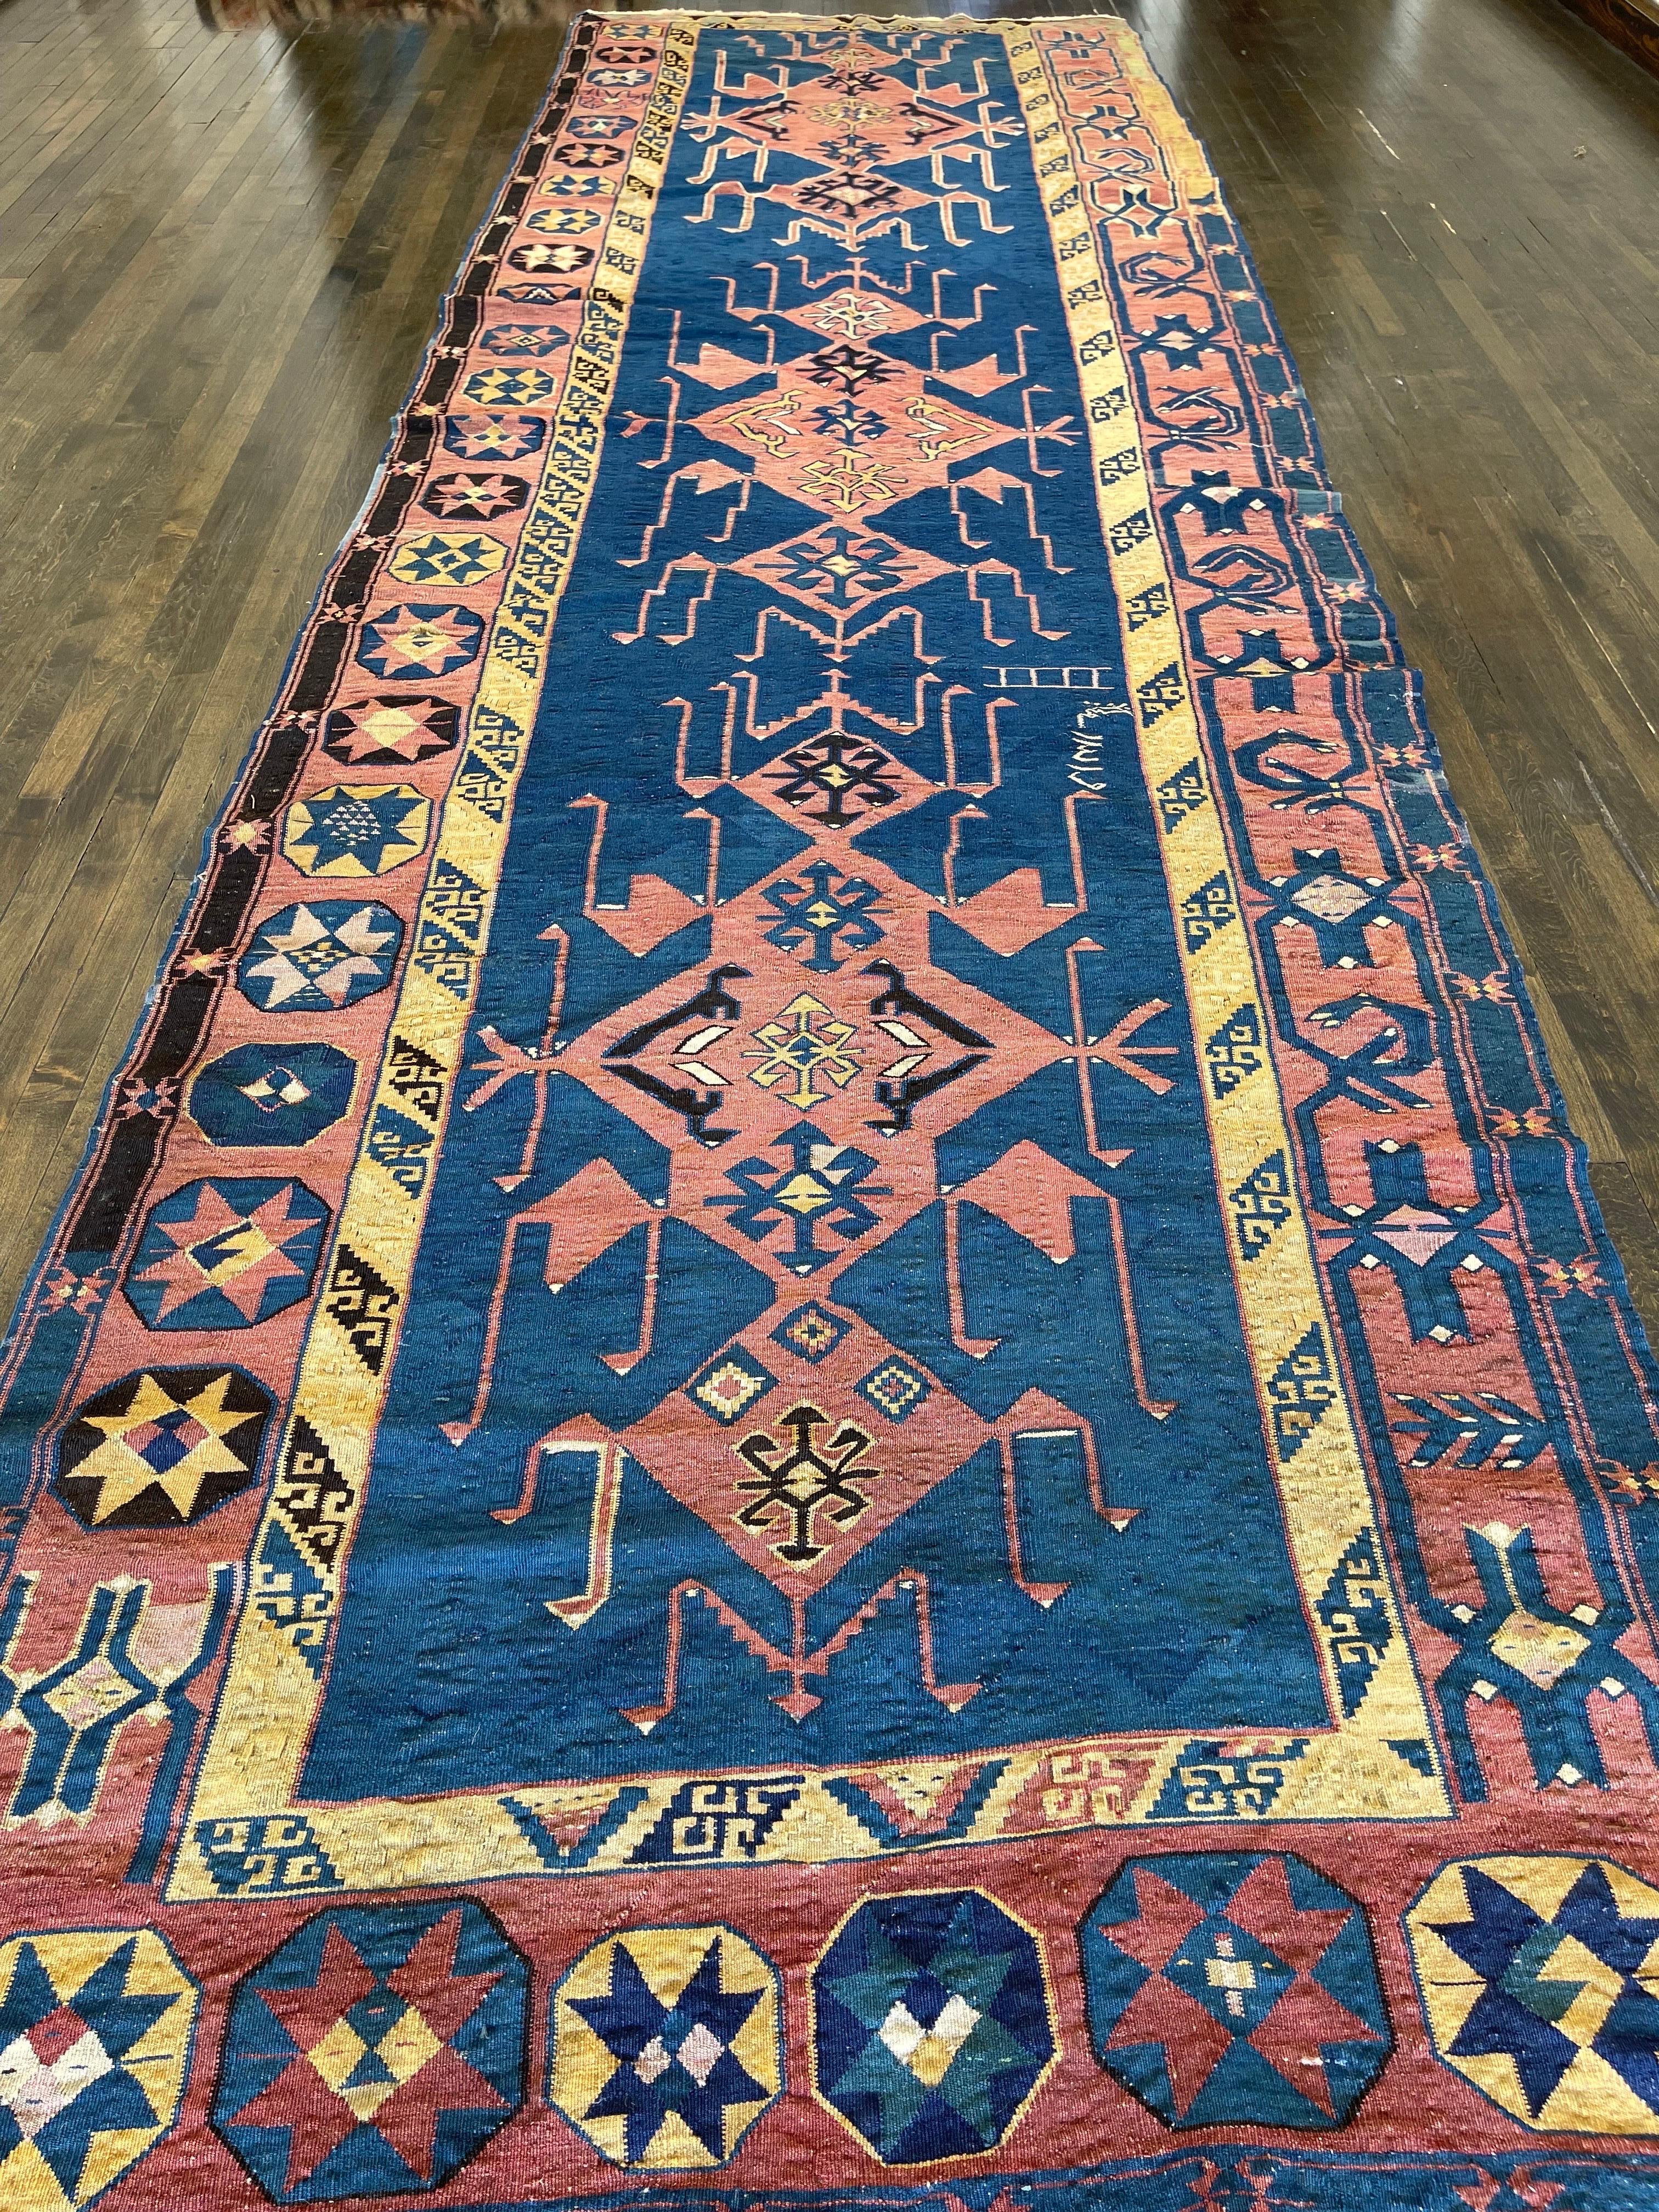 An extraordinary and rare antique Caucasian Avar flat-weave kilim with striking indigo blue field featuring a bold design with intricacy of drawing. The theme of the design is the story of dragon and phoenix combat that is rendered in a primitive